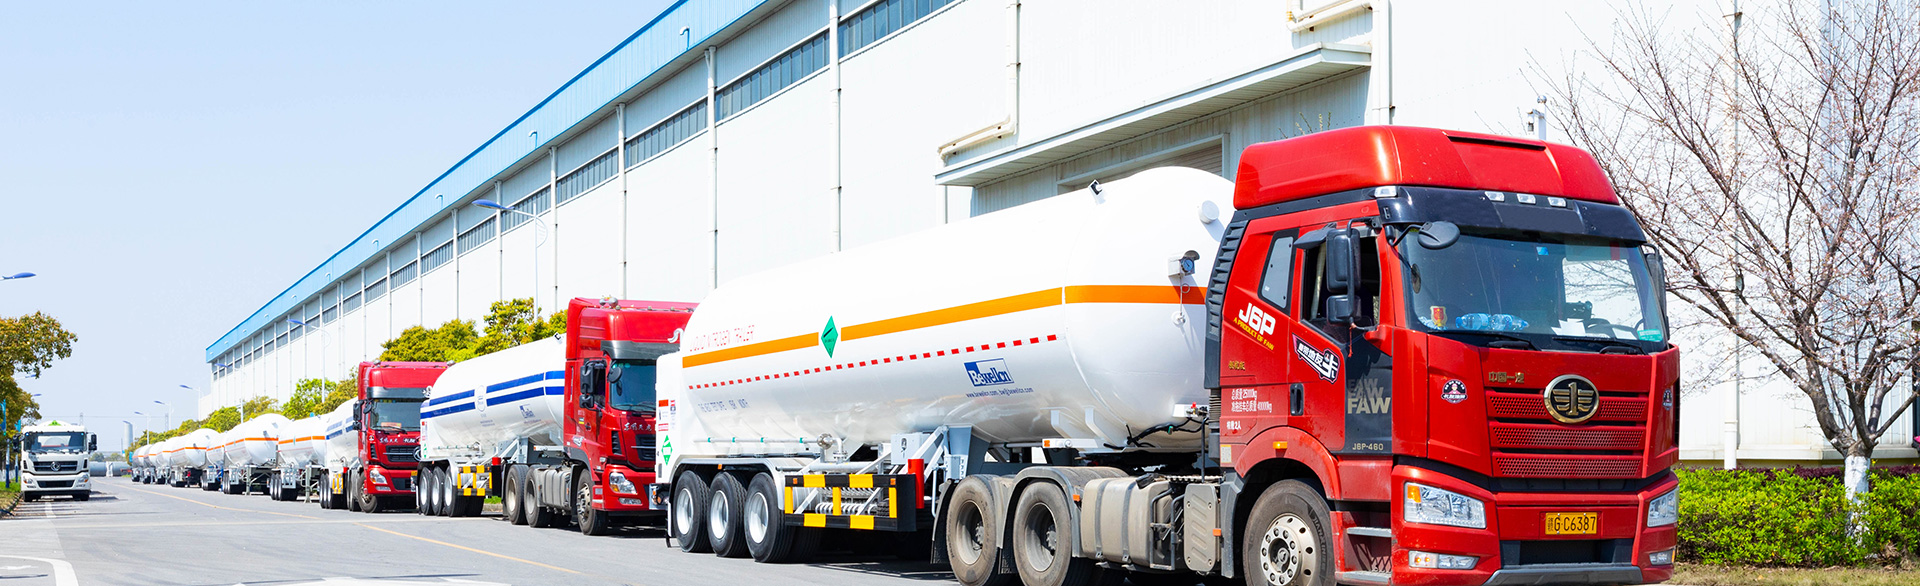 One Batch Cryogenic Trailers are delivered to Zimbabwe